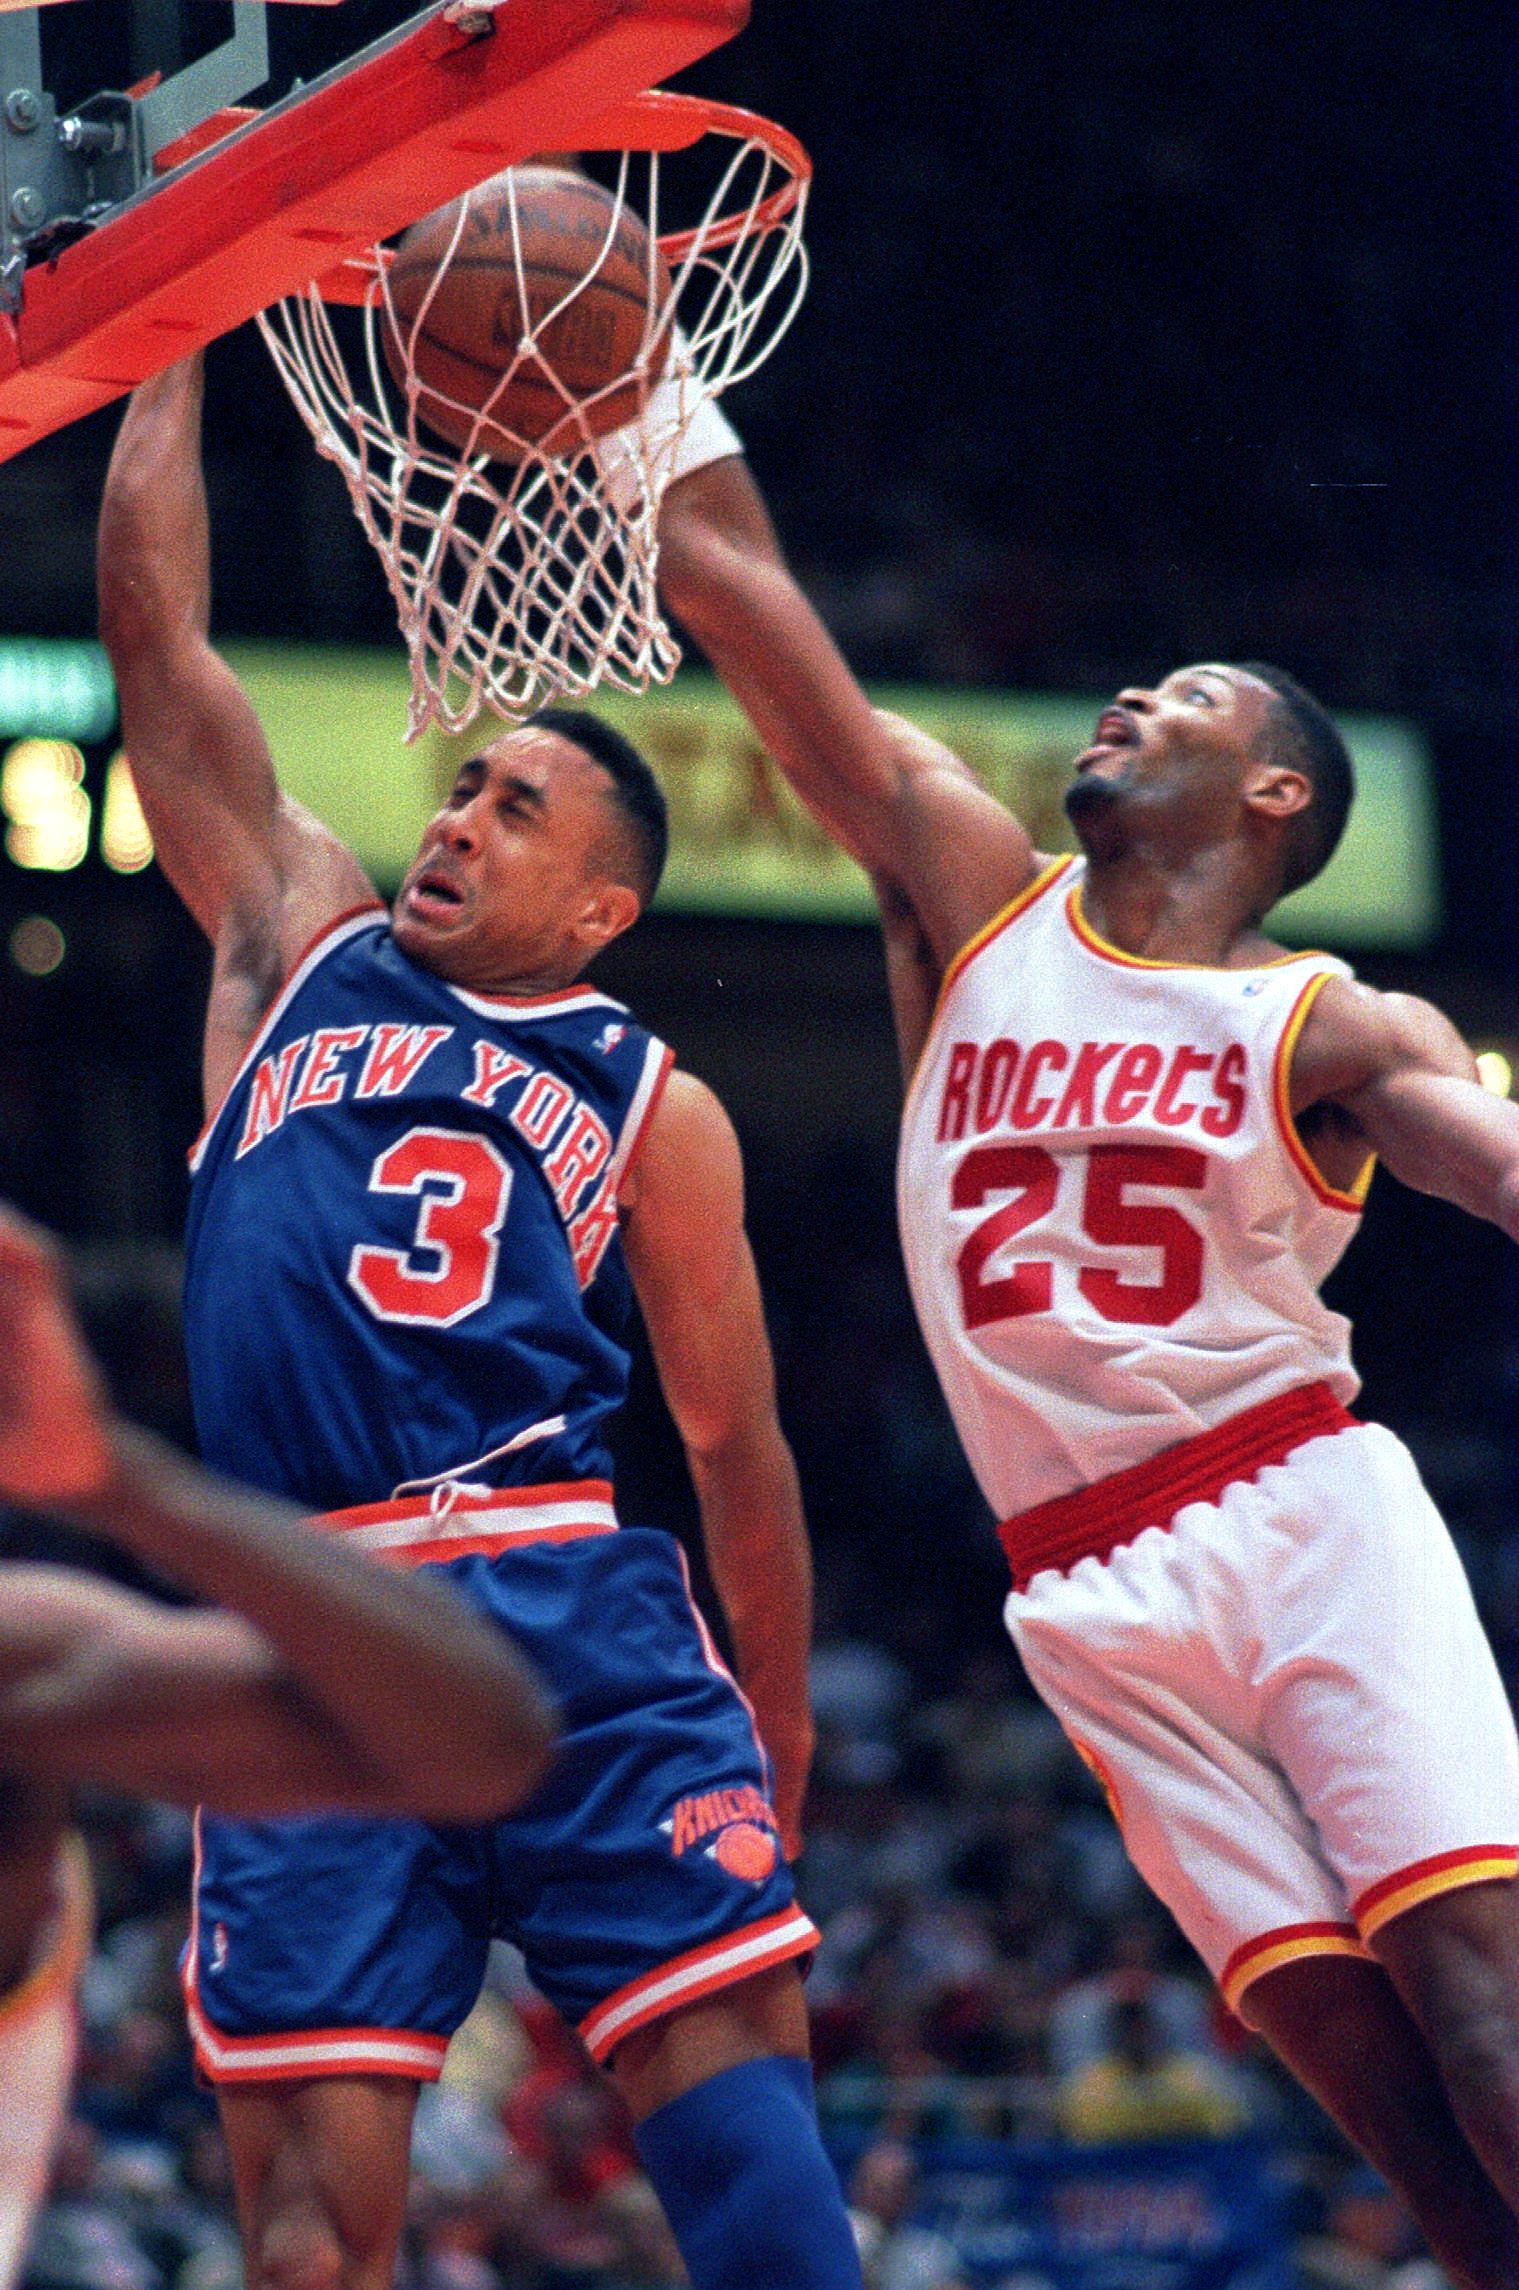 Former New York Knicks Great John Starks to Appear in Latham